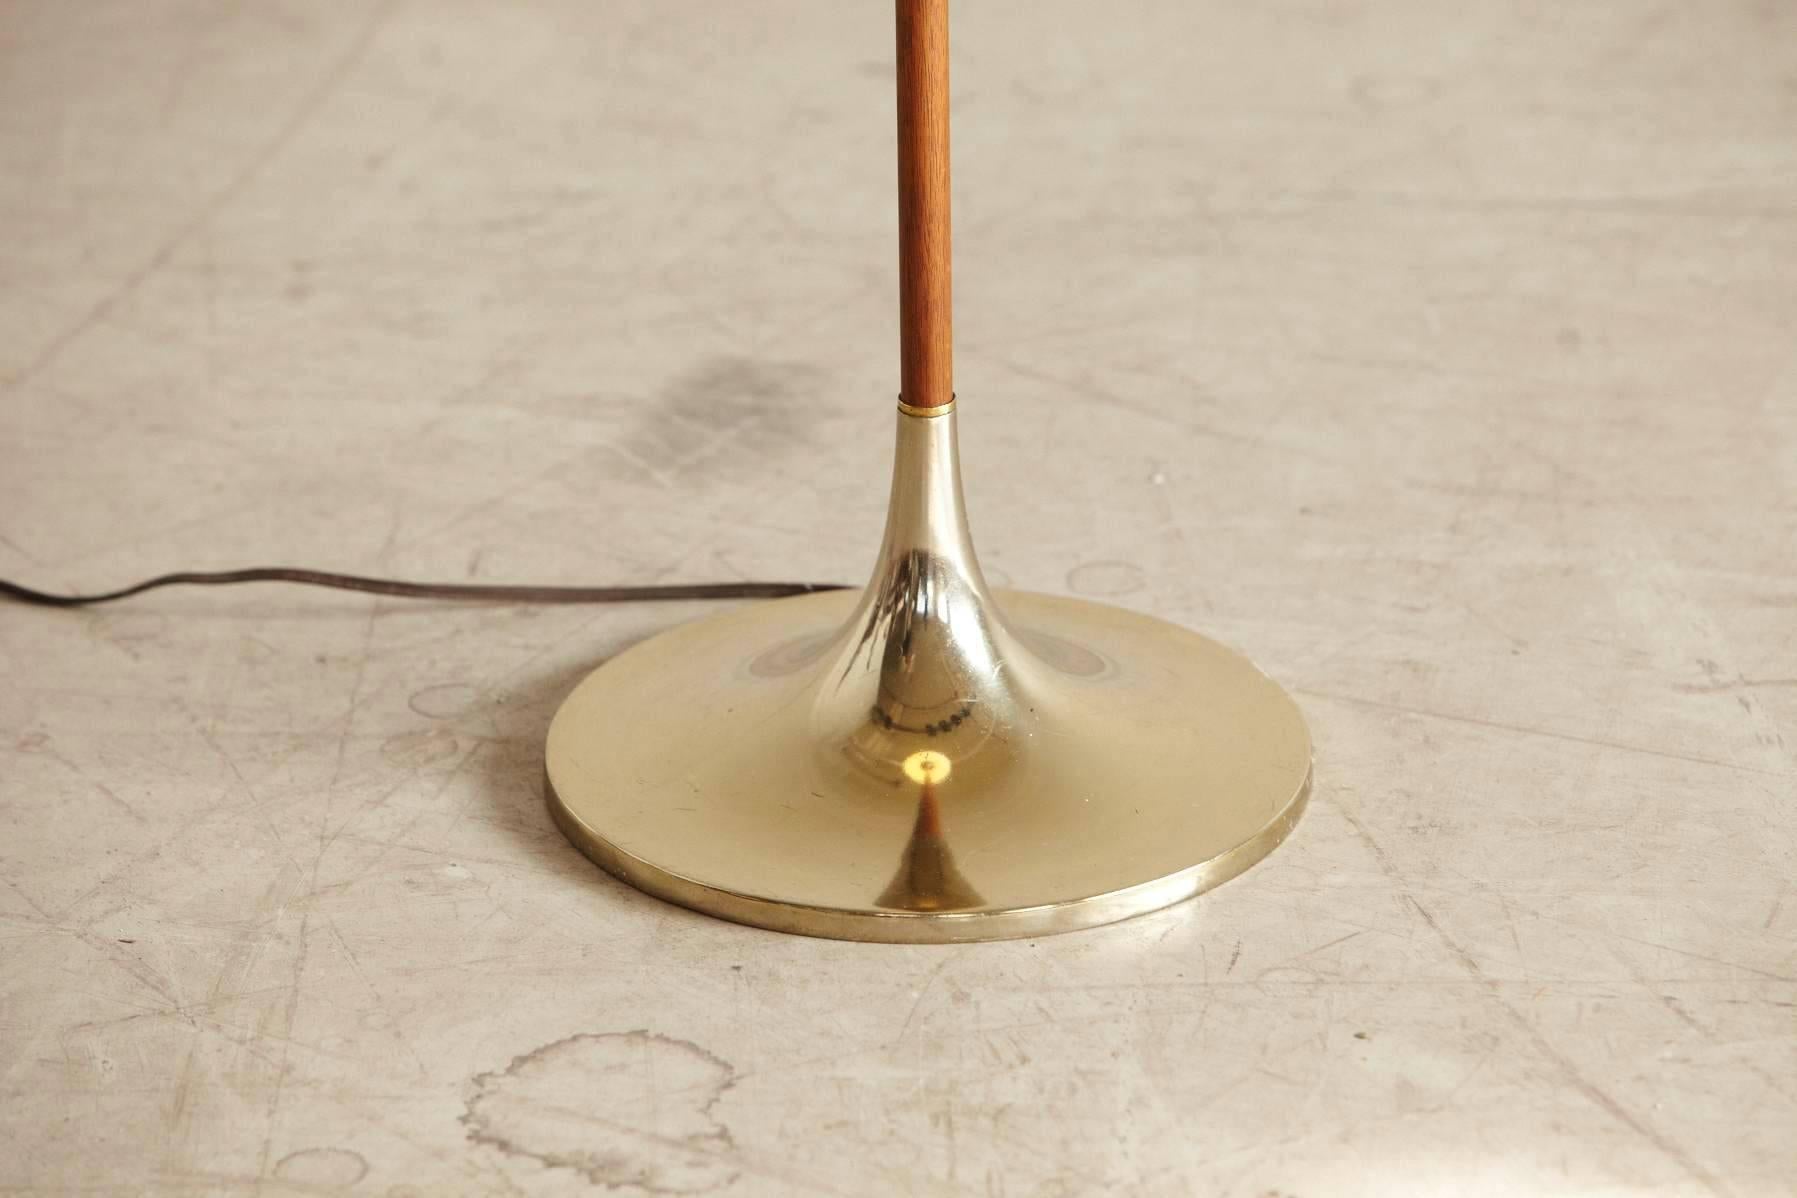 American Laurel Walnut and Brass Mushroom Floor Lamp with Frosted Glass Shade